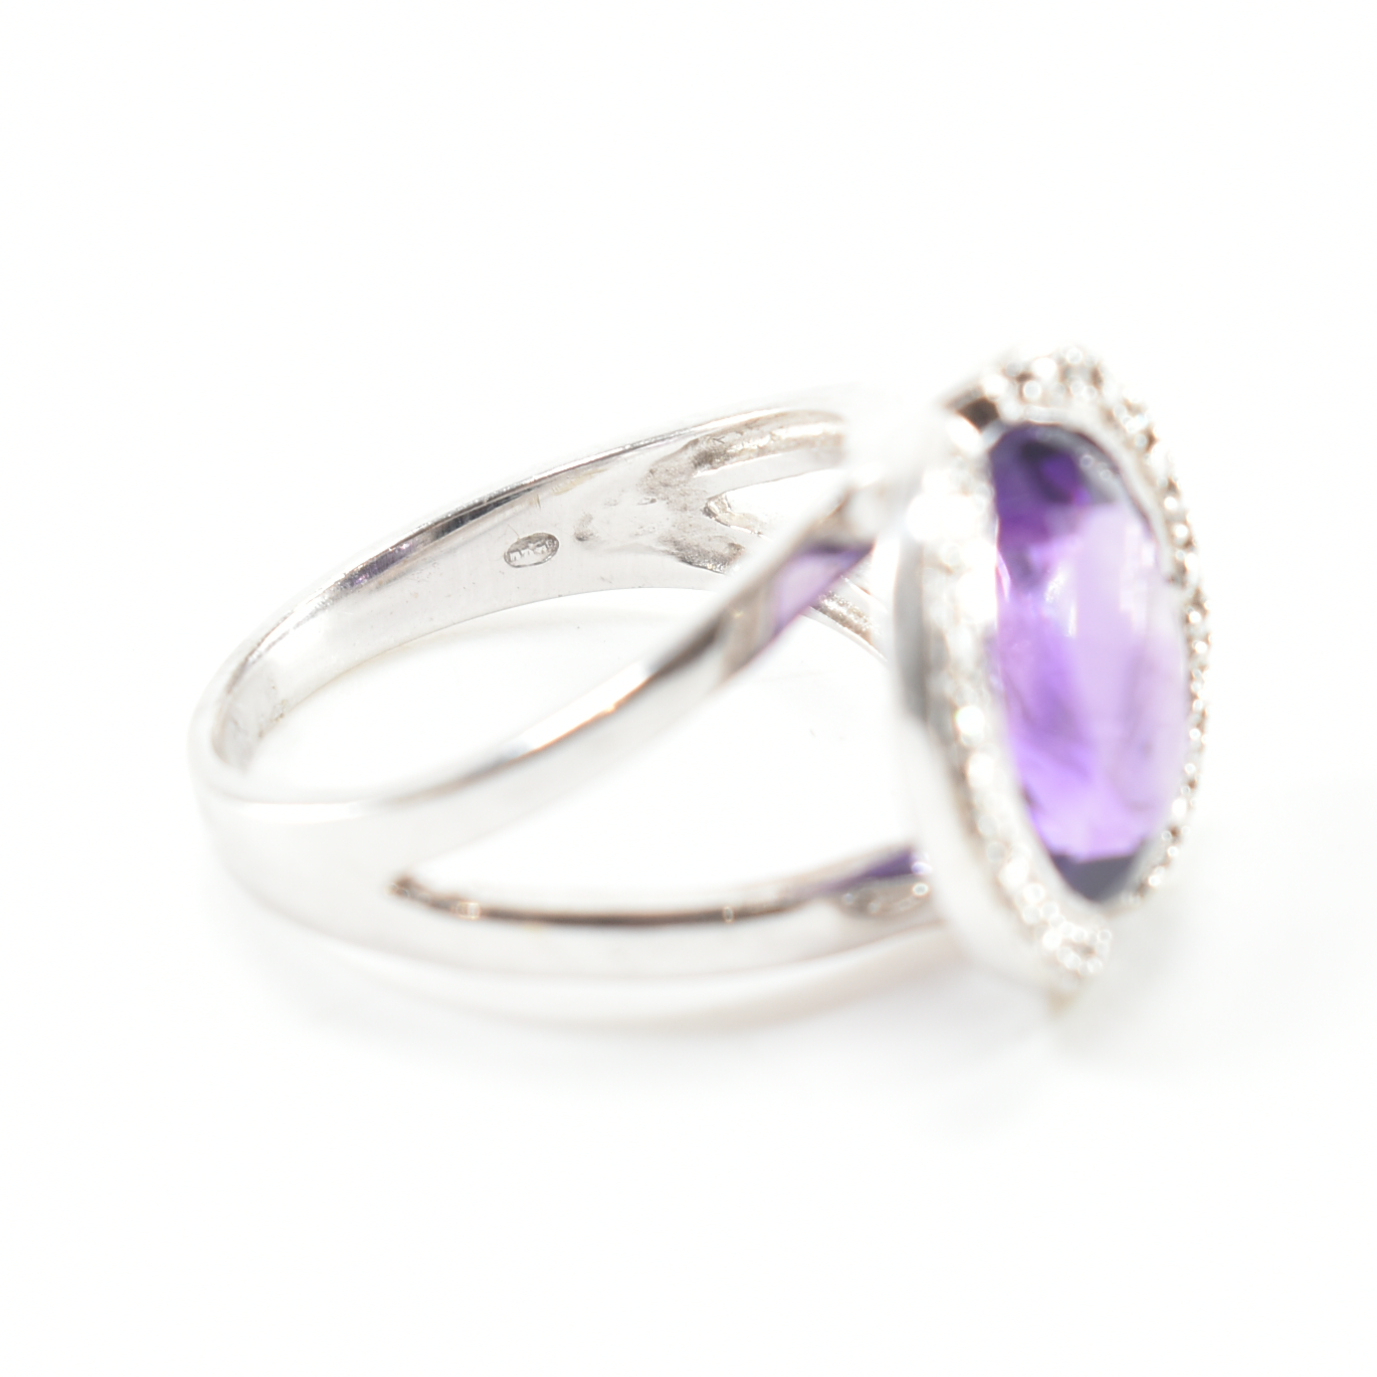 FRENCH 18CT WHITE GOLD AMETHYST & DIAMOND COCKTAIL RING - Image 8 of 9